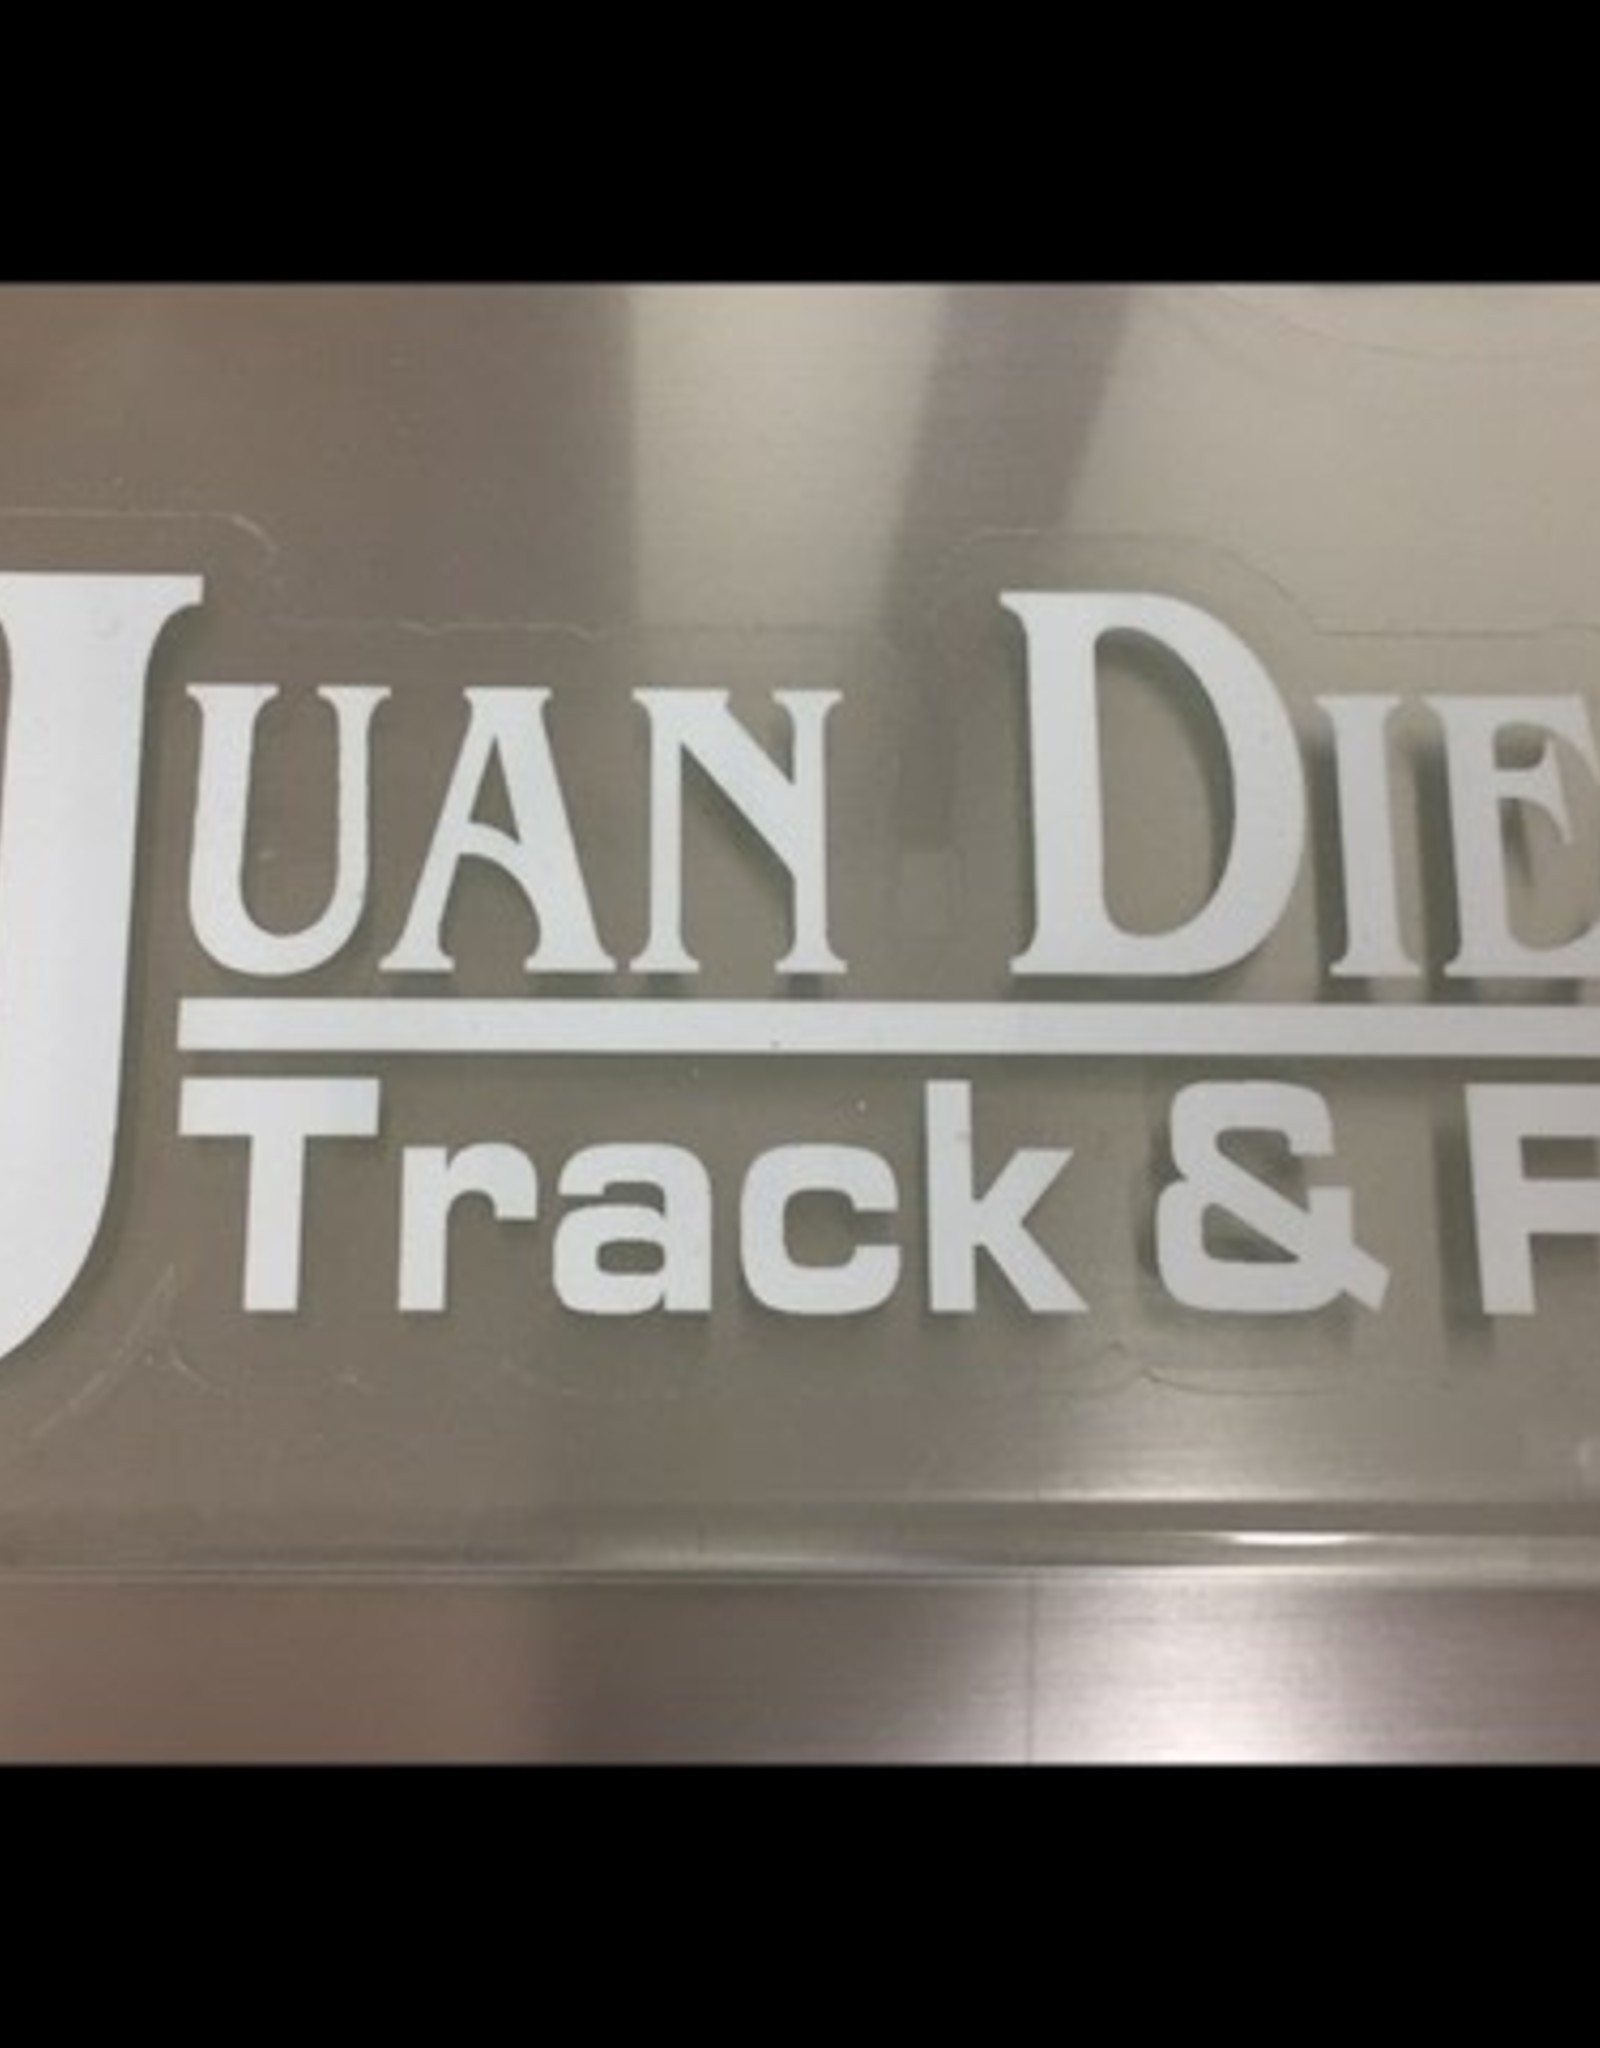 NON-UNIFORM Track & Field - Decal, clearance, sold as is